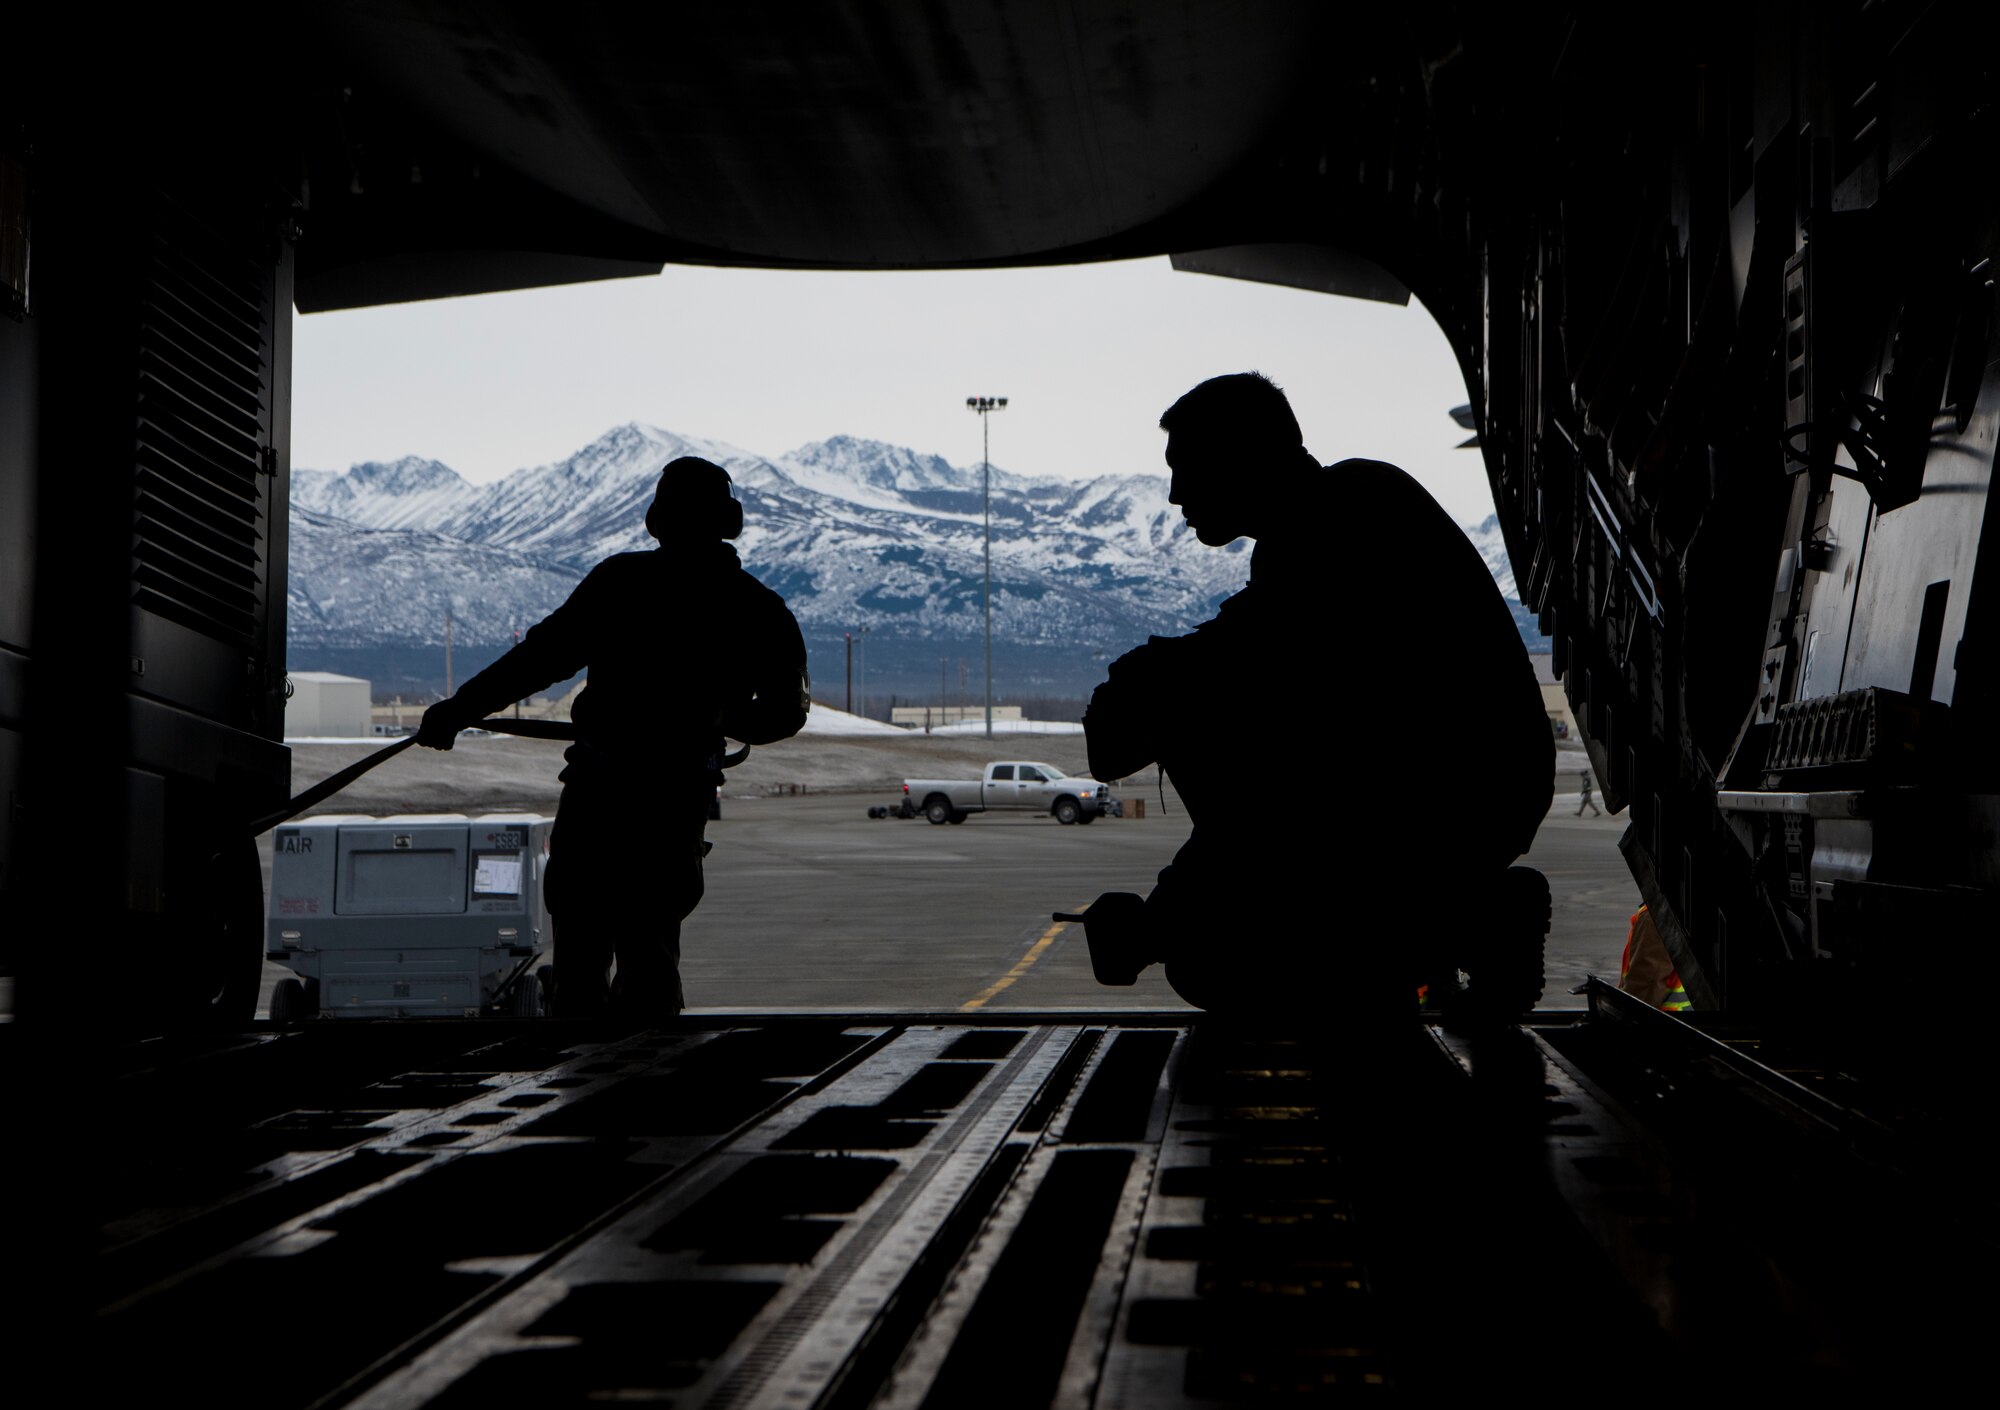 Airmen load cargo onto a C-17 Globemaster III during Polar Force 19-4 at Joint Base Elmendorf-Richardson, Alaska, March 25, 2019. Polar Force is a two-week exercise designed to test JBER’s mission readiness, and develops the skills service members require to face adverse situations.